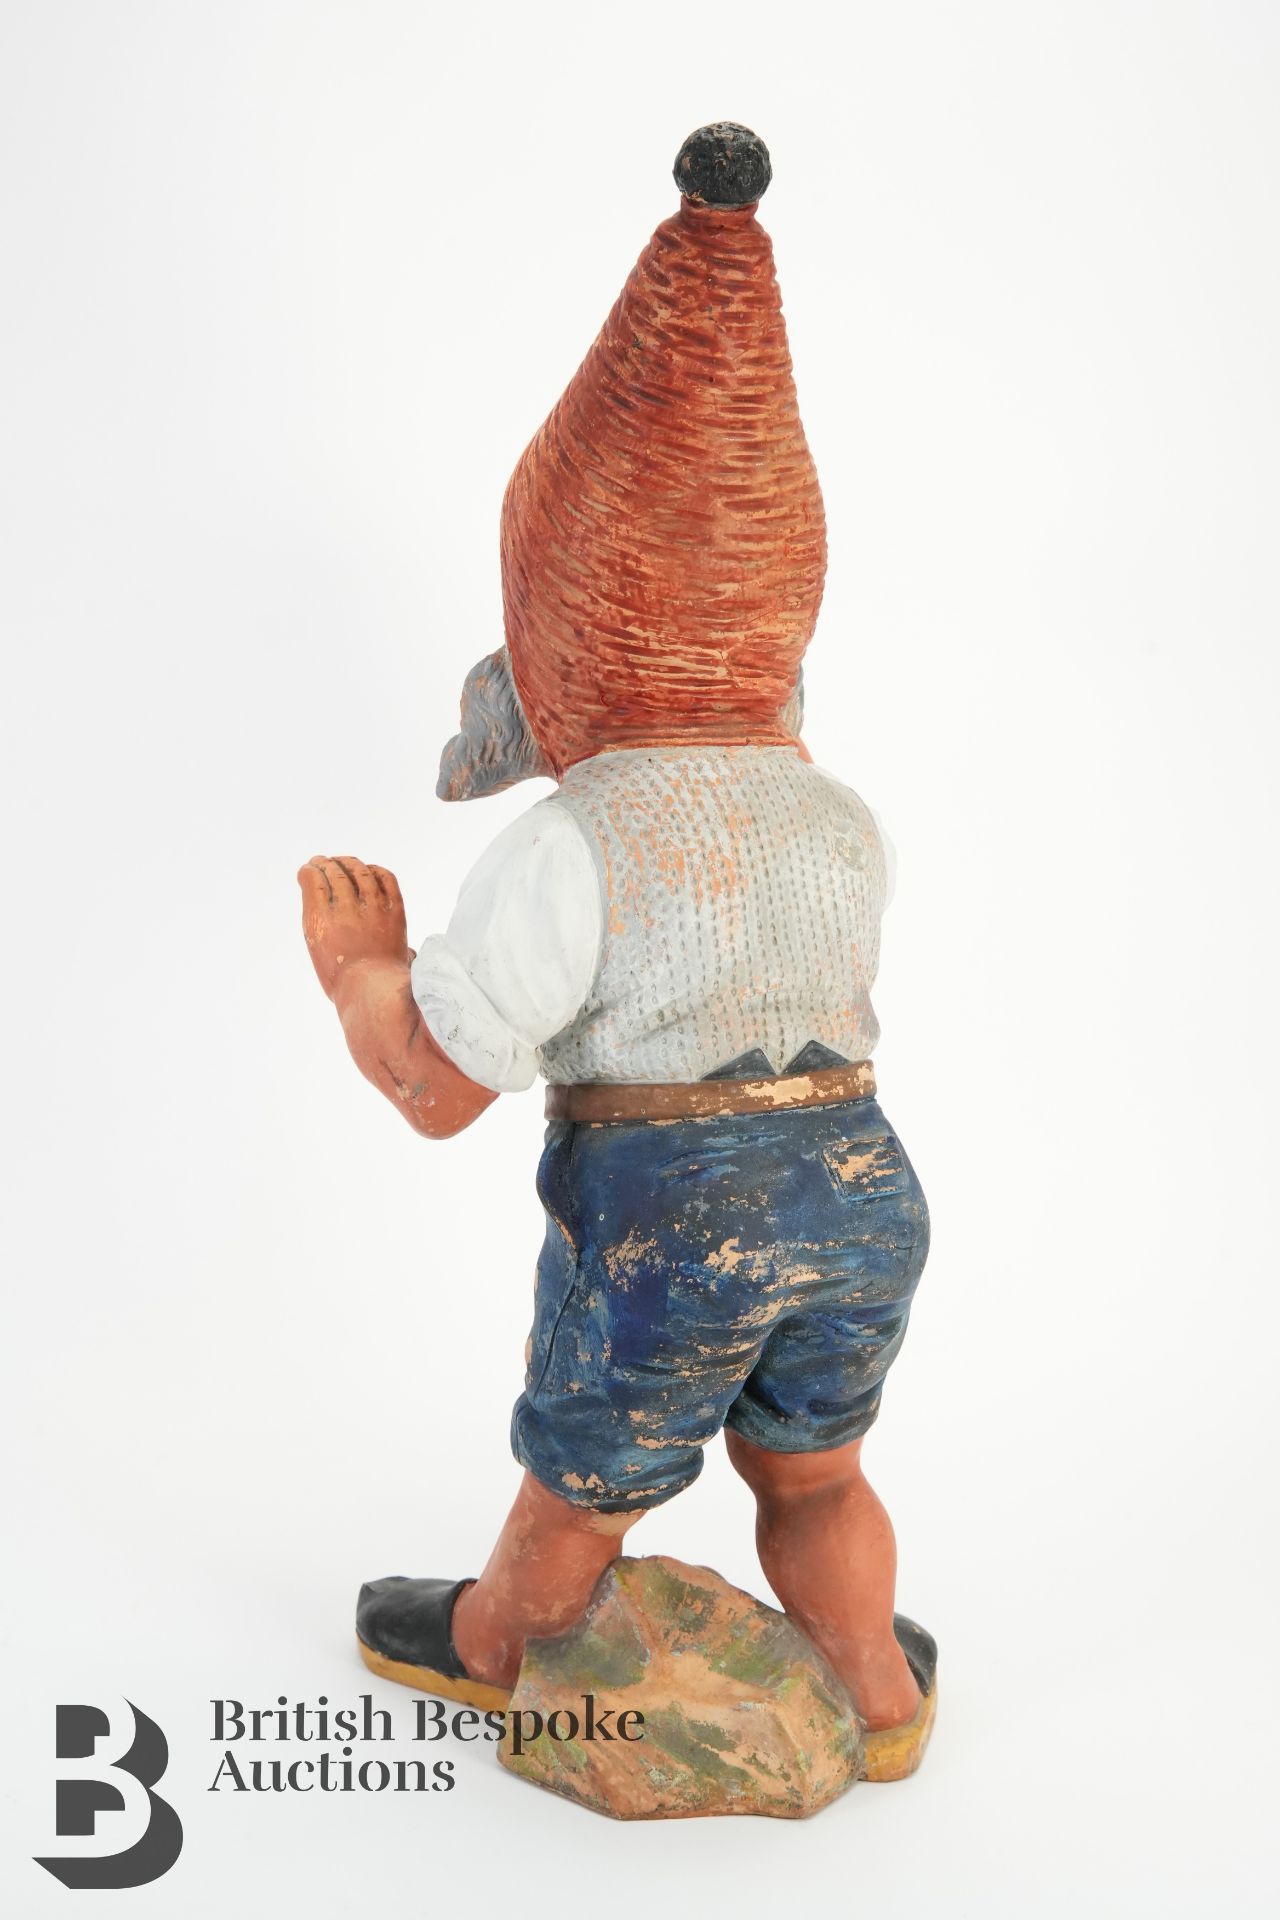 Large Terracotta German Gnome - Image 3 of 3